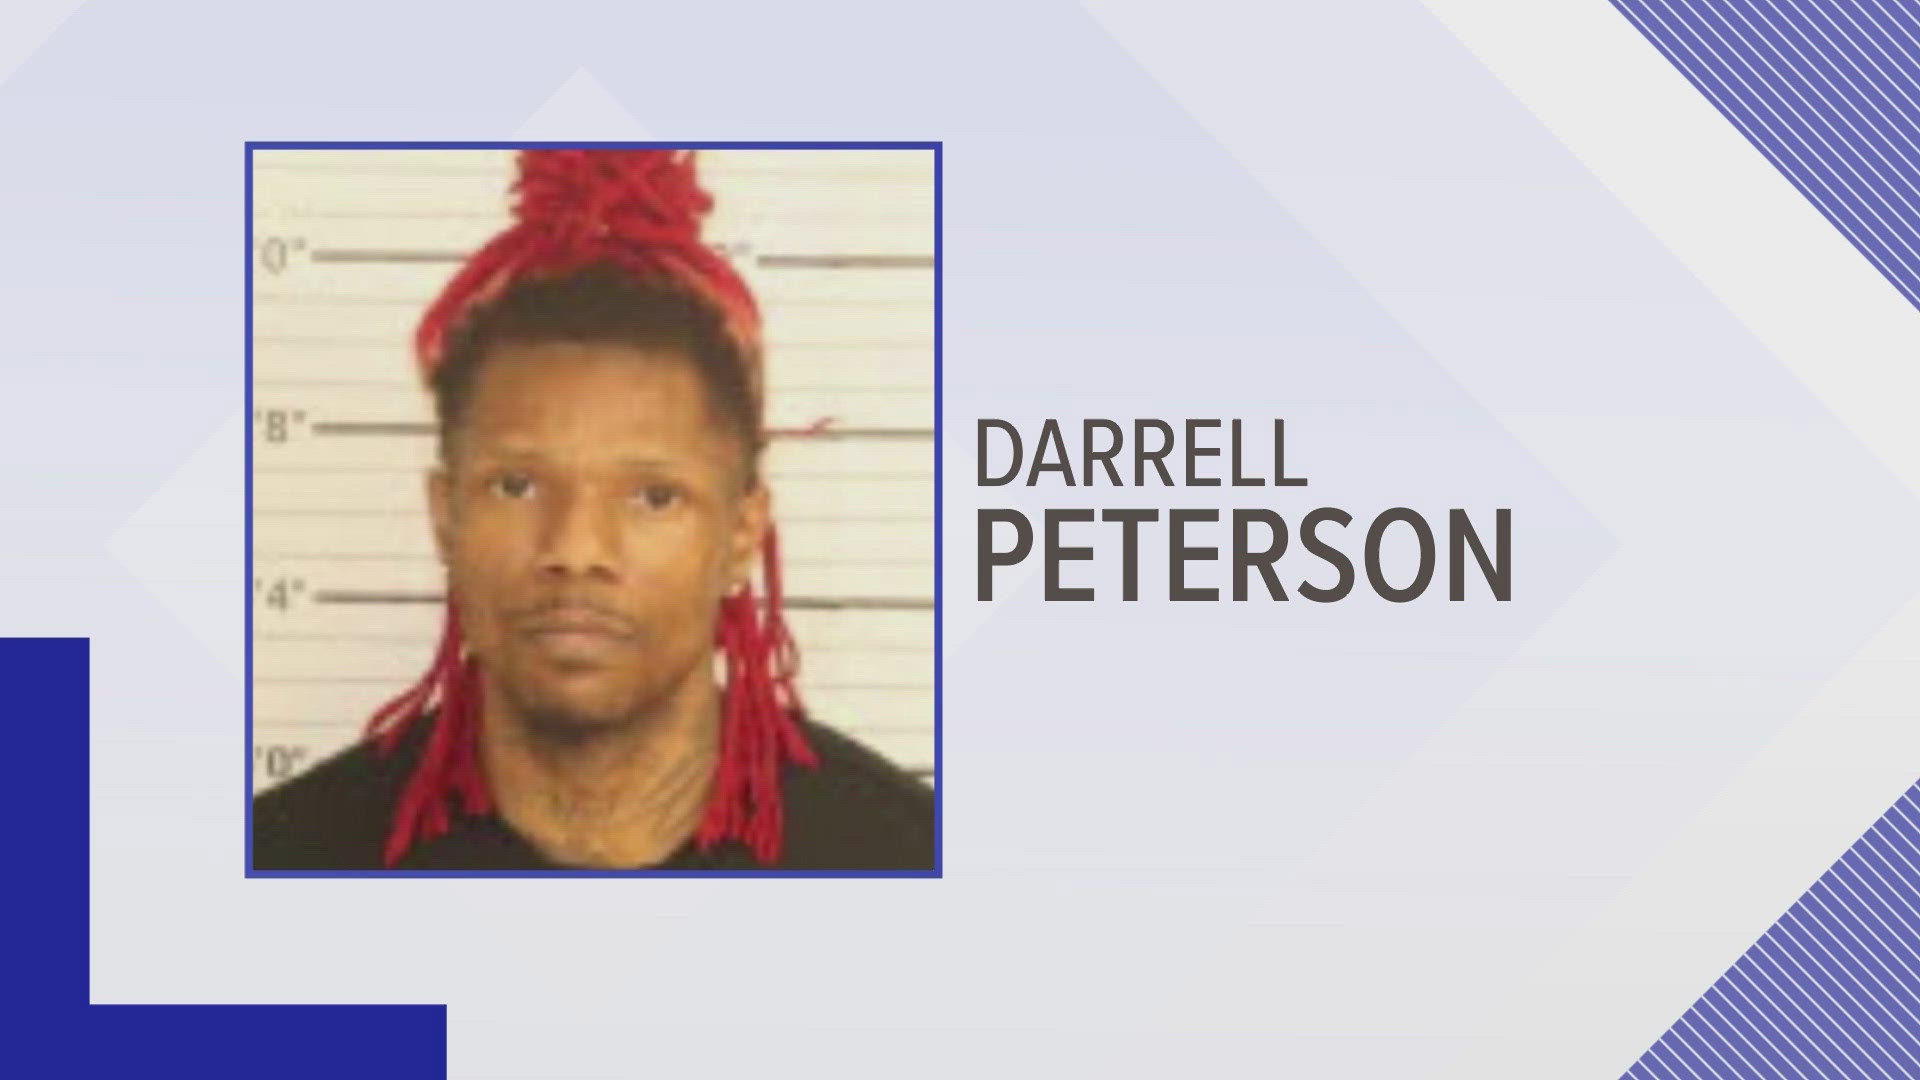 A man has been convicted of murder and attempted murder in a shooting in Frayser in May 2020 which police said killed an innocent bystander.